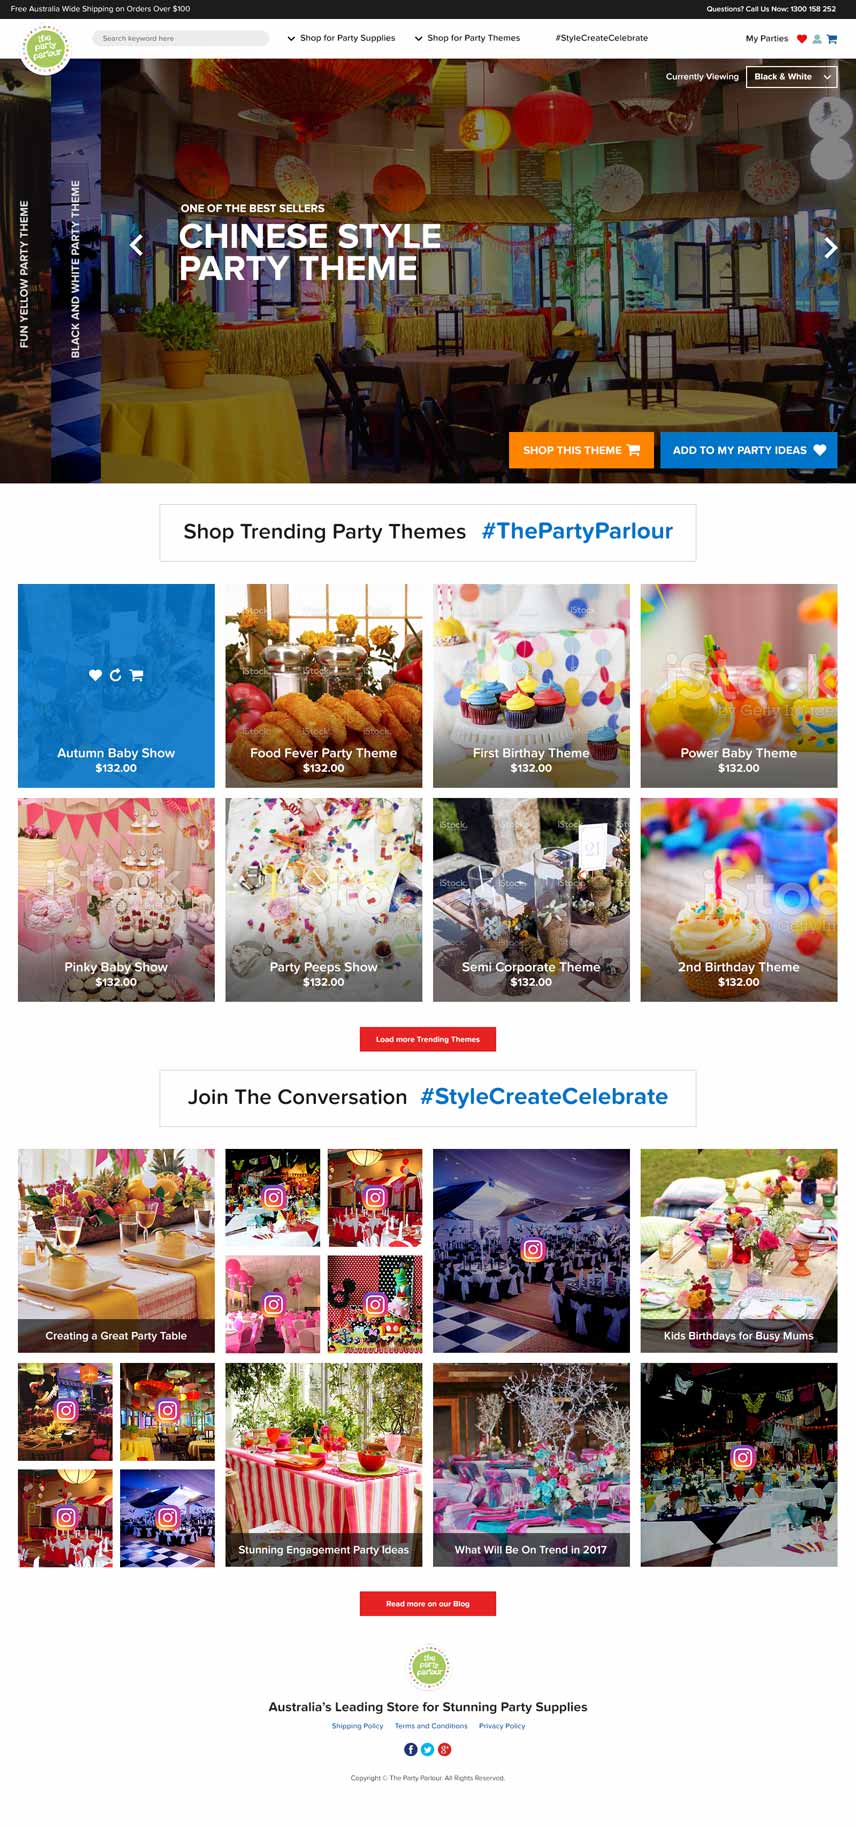 Partyparlour Homepage